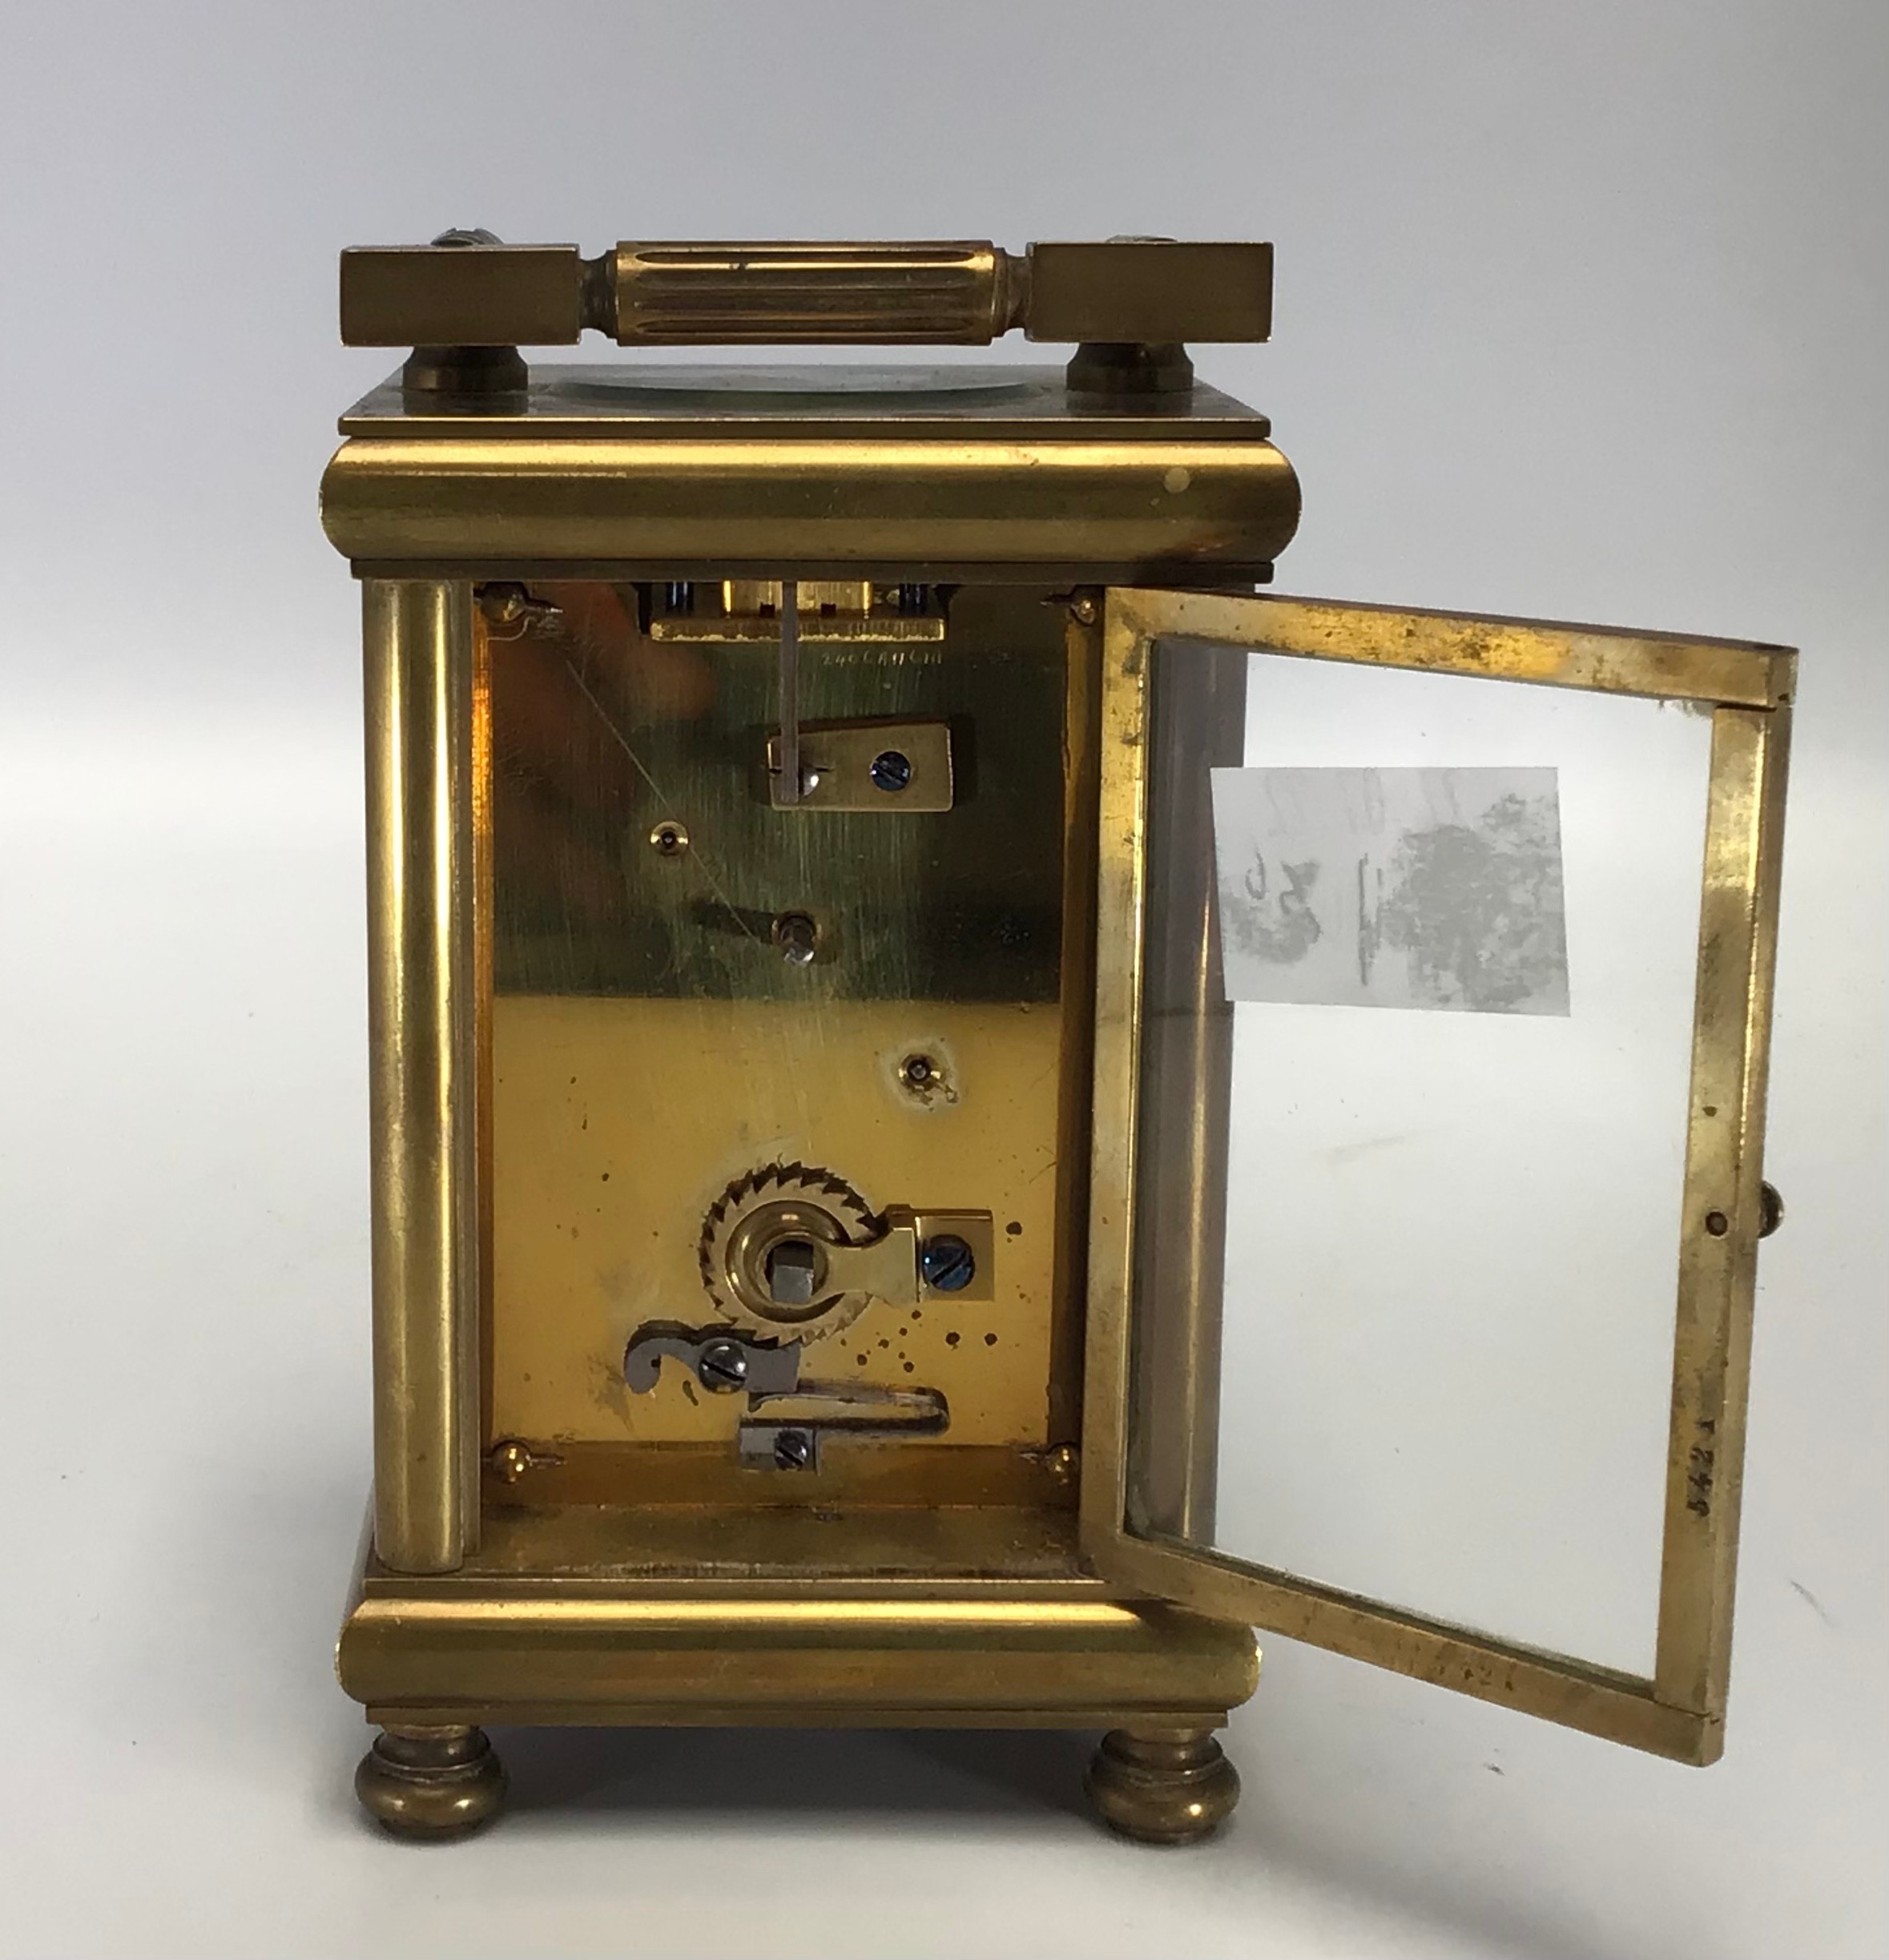 A Swiss brass cased carriage clock with blue and white porcelain panelled sides and dial panel, - Image 7 of 8